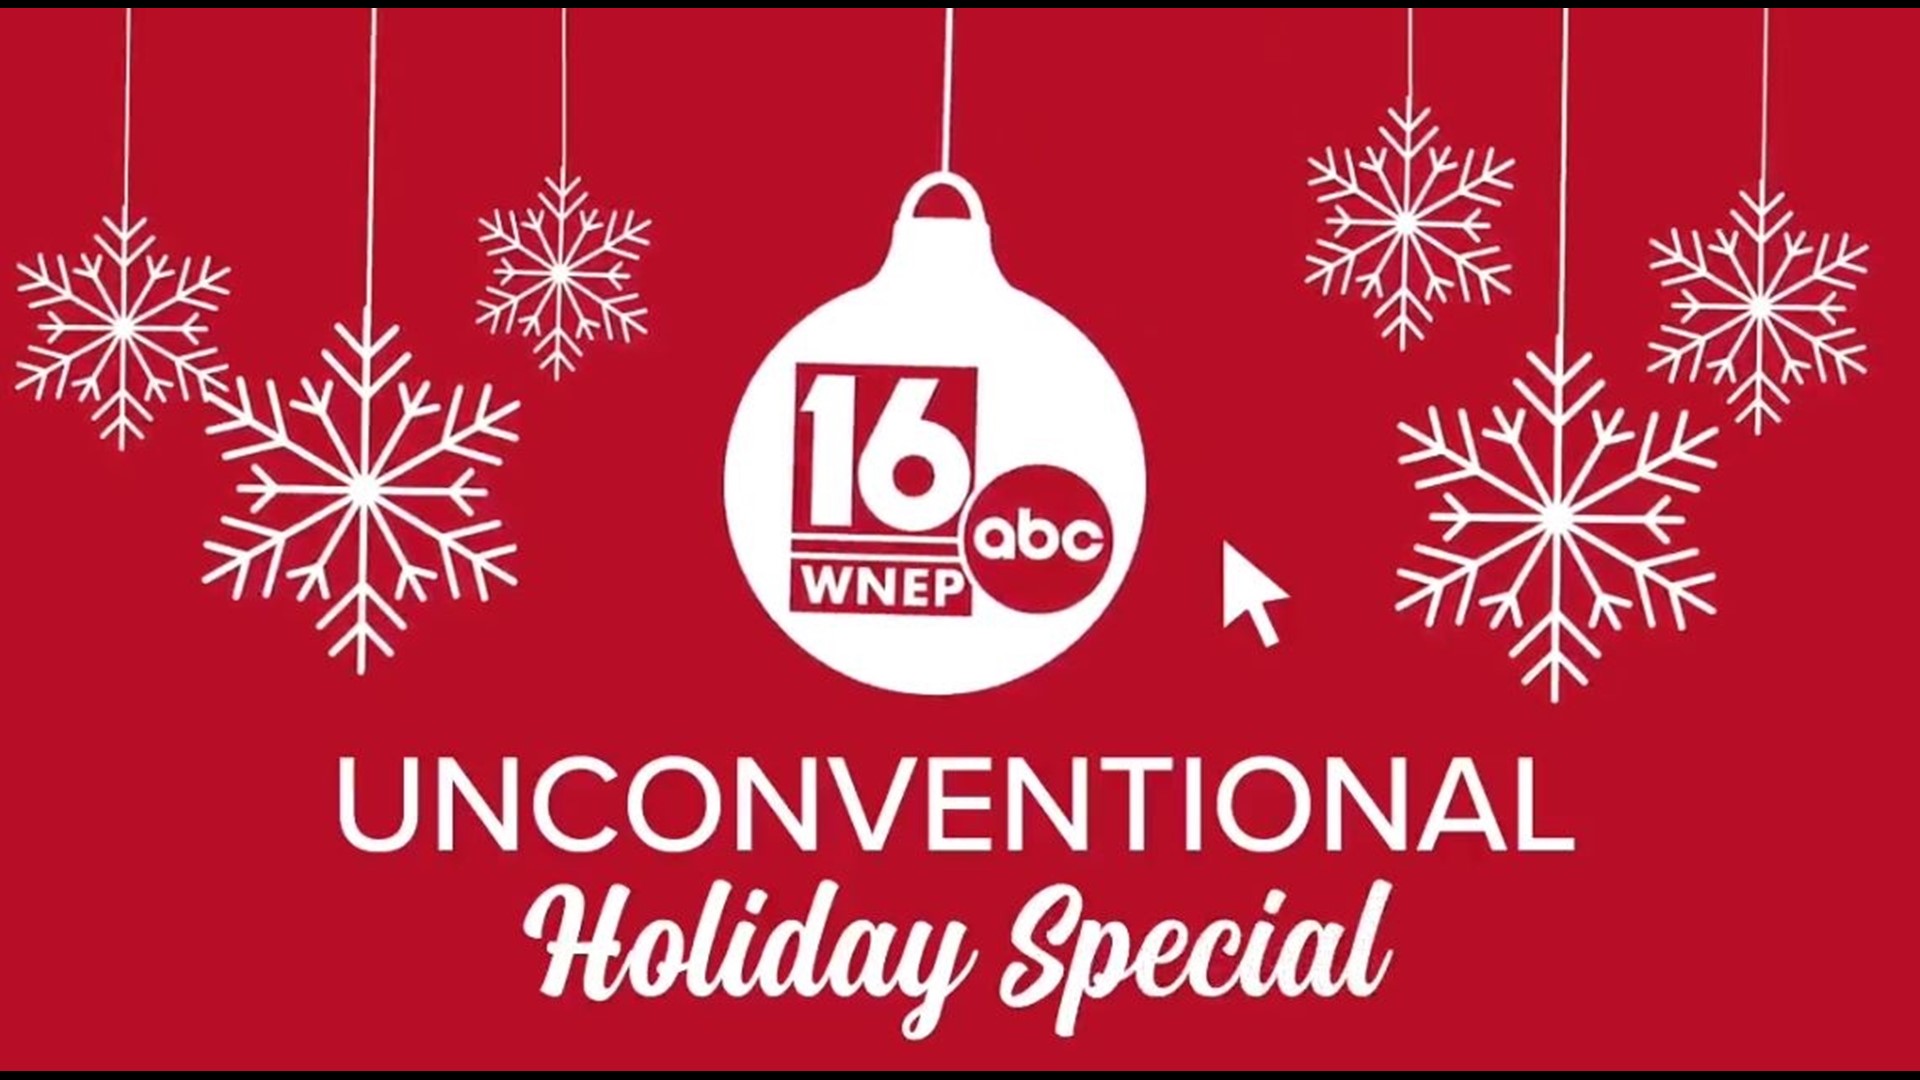 Join your favorite WNEP personalities as they share family traditions and more!